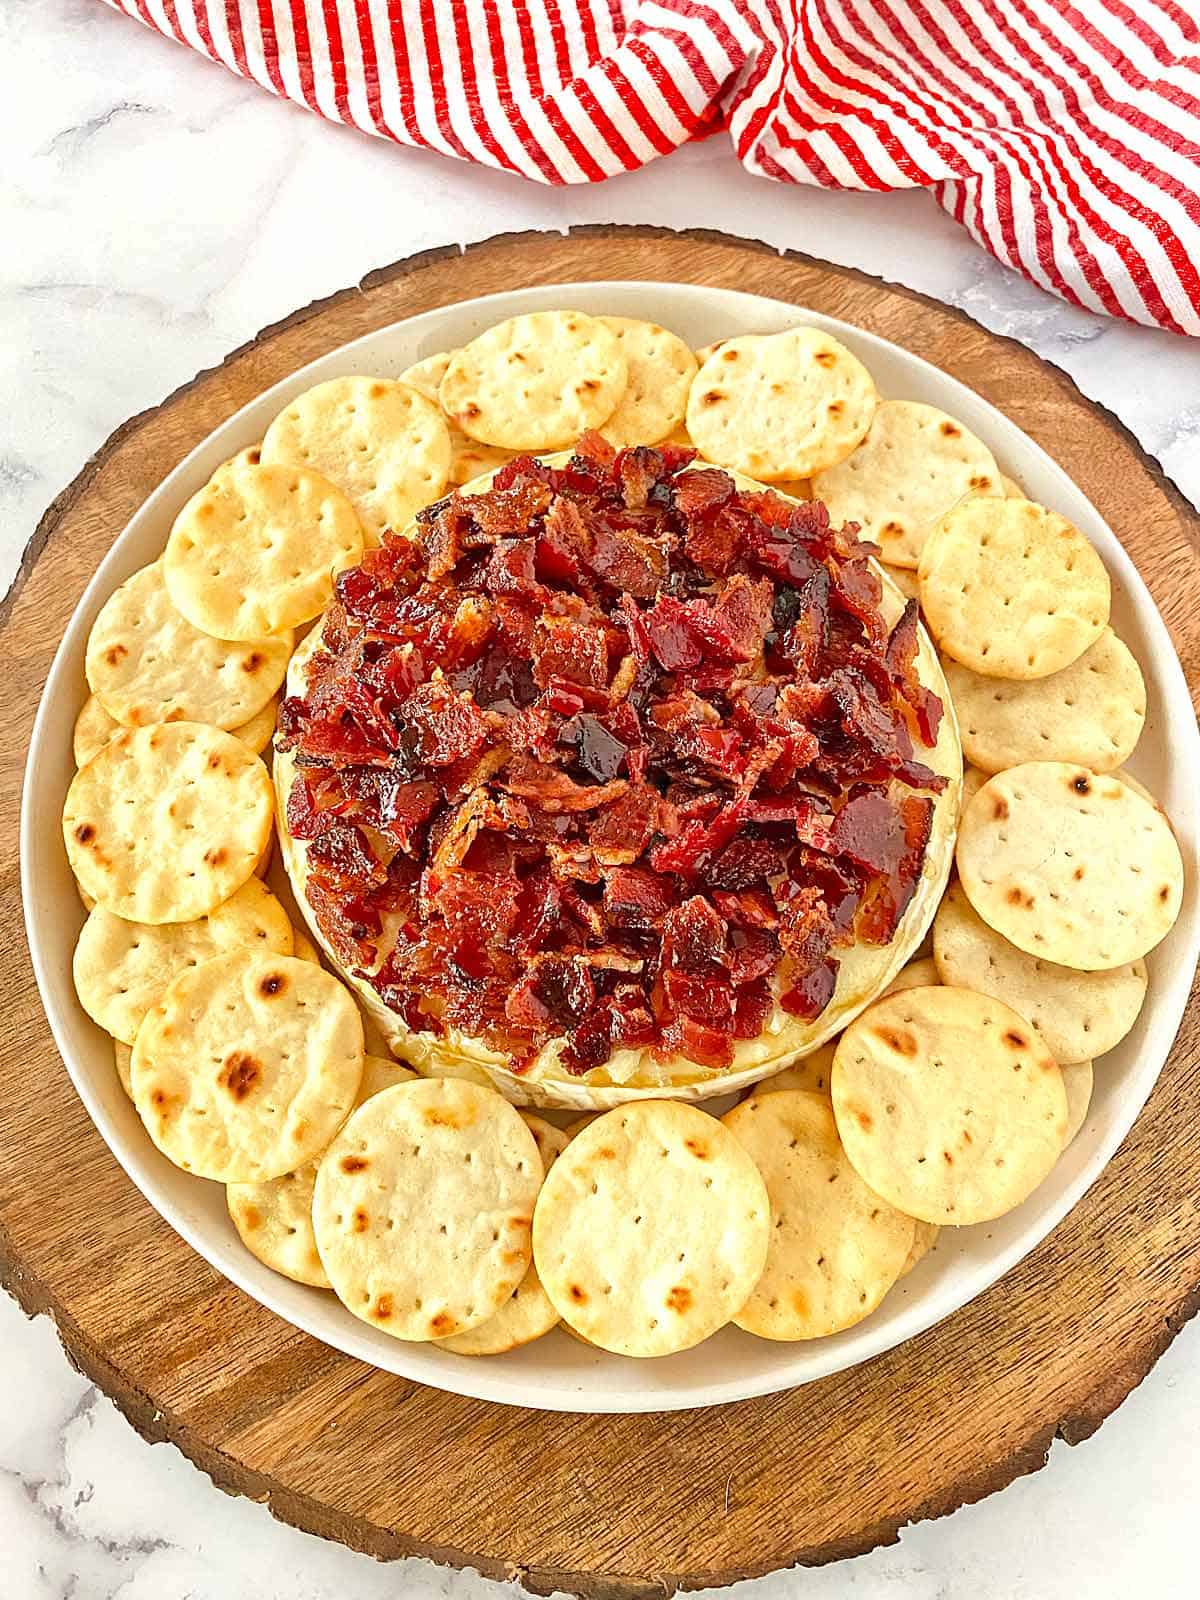 Bacon topped Brie Cheese surrounded by crackers on a serving plate.